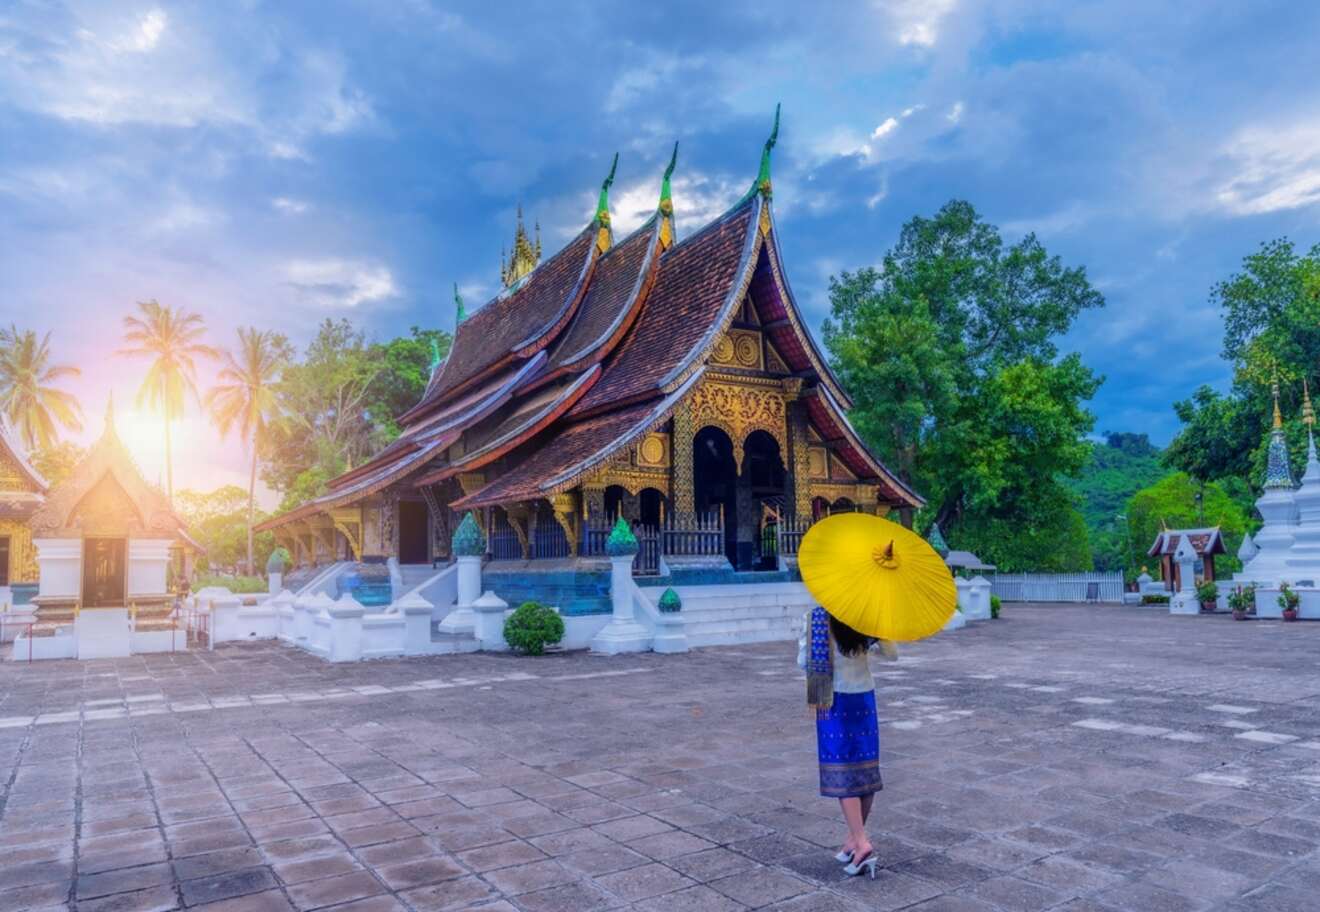 The serene Wat Xieng Thong temple in Luang Prabang, with its ornate golden roof and a woman holding a yellow umbrella.